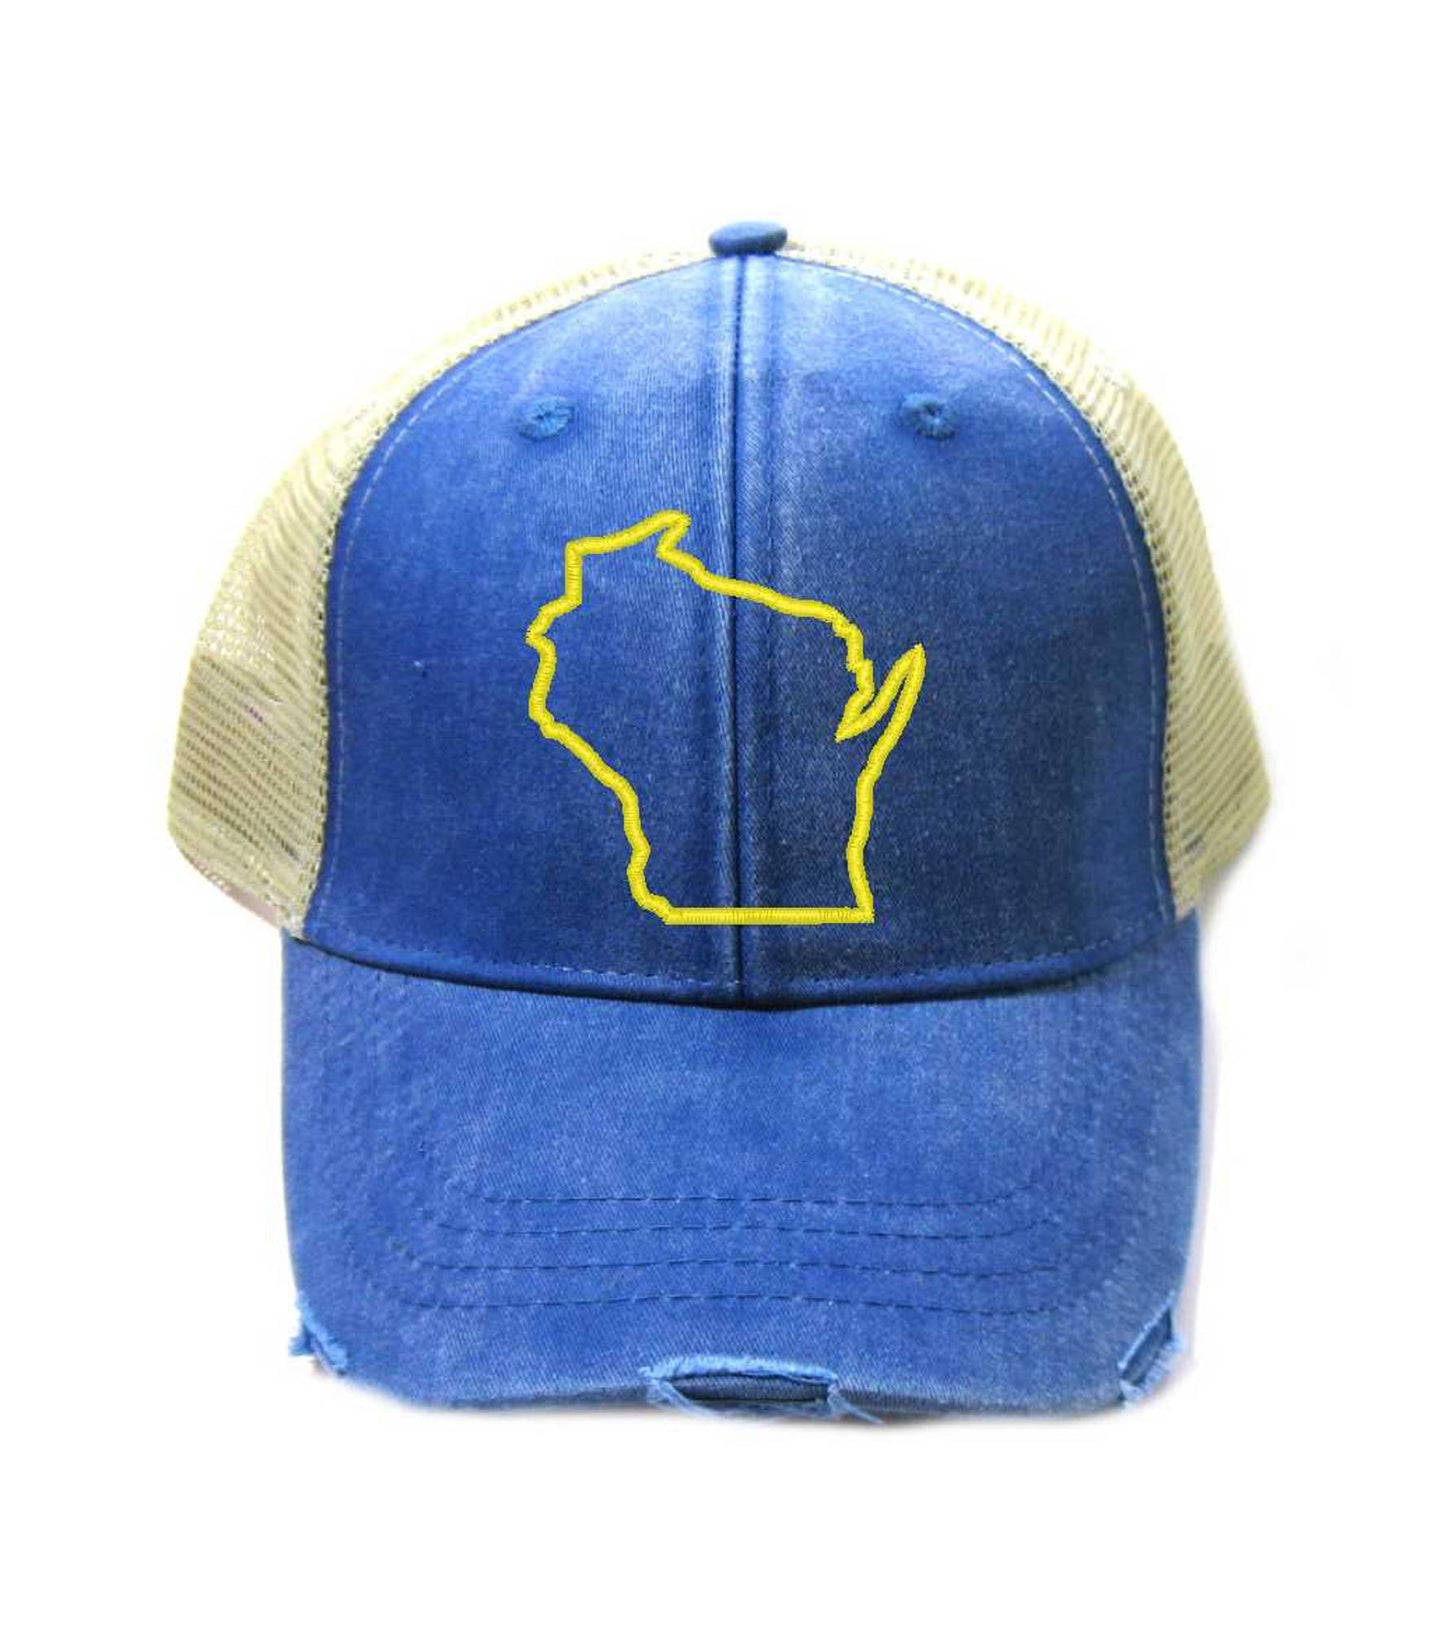 Wisconsin Hat - Distressed Snapback Trucker Hat - Wisconsin State Outline - Many Colors Available